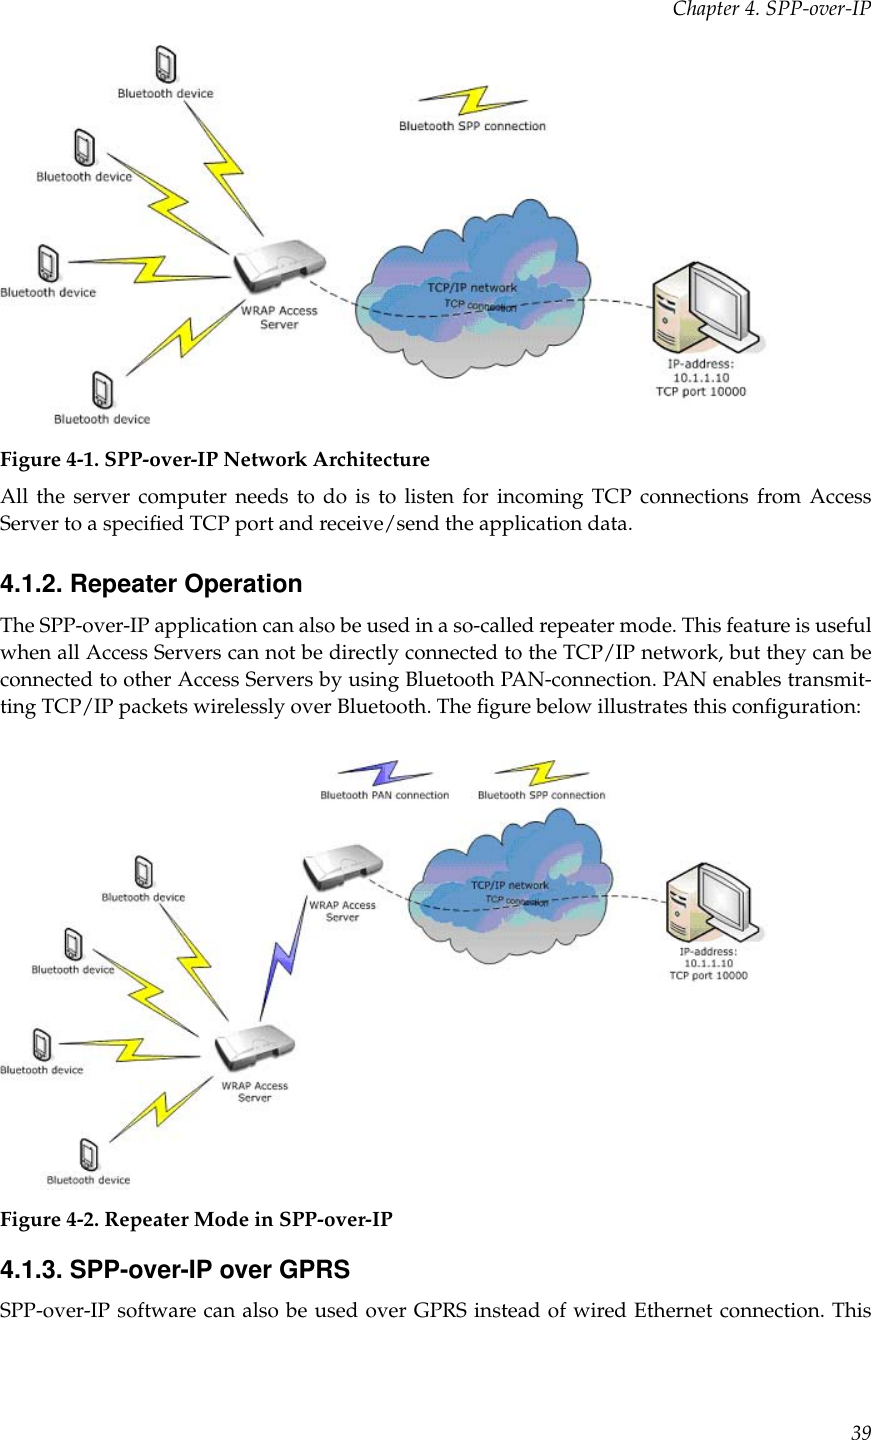 Chapter 4. SPP-over-IPFigure 4-1. SPP-over-IP Network ArchitectureAll the server computer needs to do is to listen for incoming TCP connections from AccessServer to a speciﬁed TCP port and receive/send the application data.4.1.2. Repeater OperationThe SPP-over-IP application can also be used in a so-called repeater mode. This feature is usefulwhen all Access Servers can not be directly connected to the TCP/IP network, but they can beconnected to other Access Servers by using Bluetooth PAN-connection. PAN enables transmit-ting TCP/IP packets wirelessly over Bluetooth. The ﬁgure below illustrates this conﬁguration:Figure 4-2. Repeater Mode in SPP-over-IP4.1.3. SPP-over-IP over GPRSSPP-over-IP software can also be used over GPRS instead of wired Ethernet connection. This39